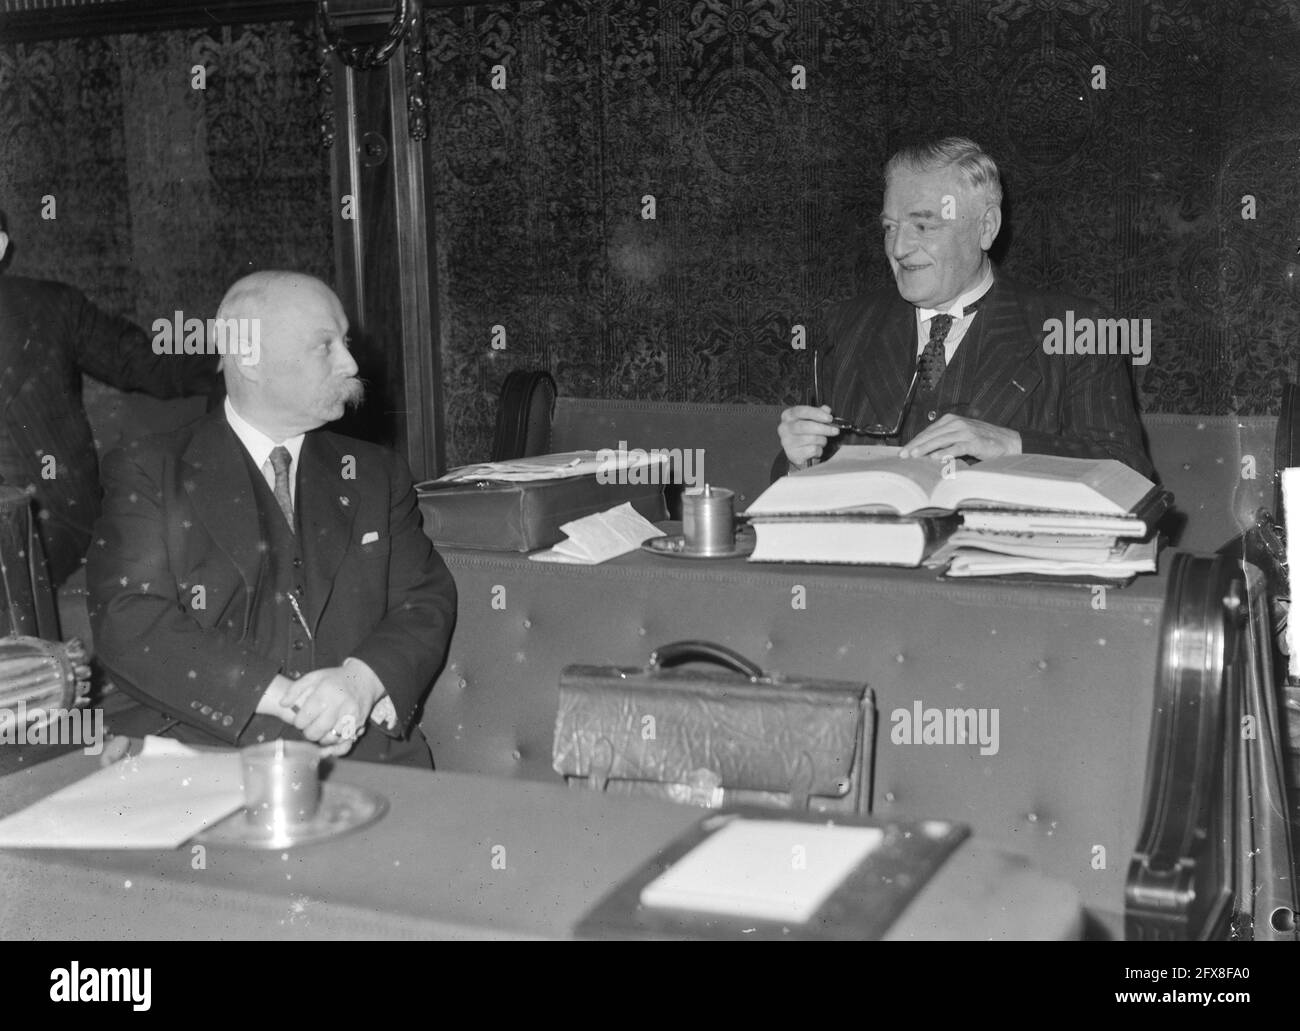 Consideration of Round Table Conference in the House of Representatives. Jan Schouten and Gerbrandy (right) of the ARP, December 6, 1949, debates, politicians, politics, The Netherlands, 20th century press agency photo, news to remember, documentary, historic photography 1945-1990, visual stories, human history of the Twentieth Century, capturing moments in time Stock Photo